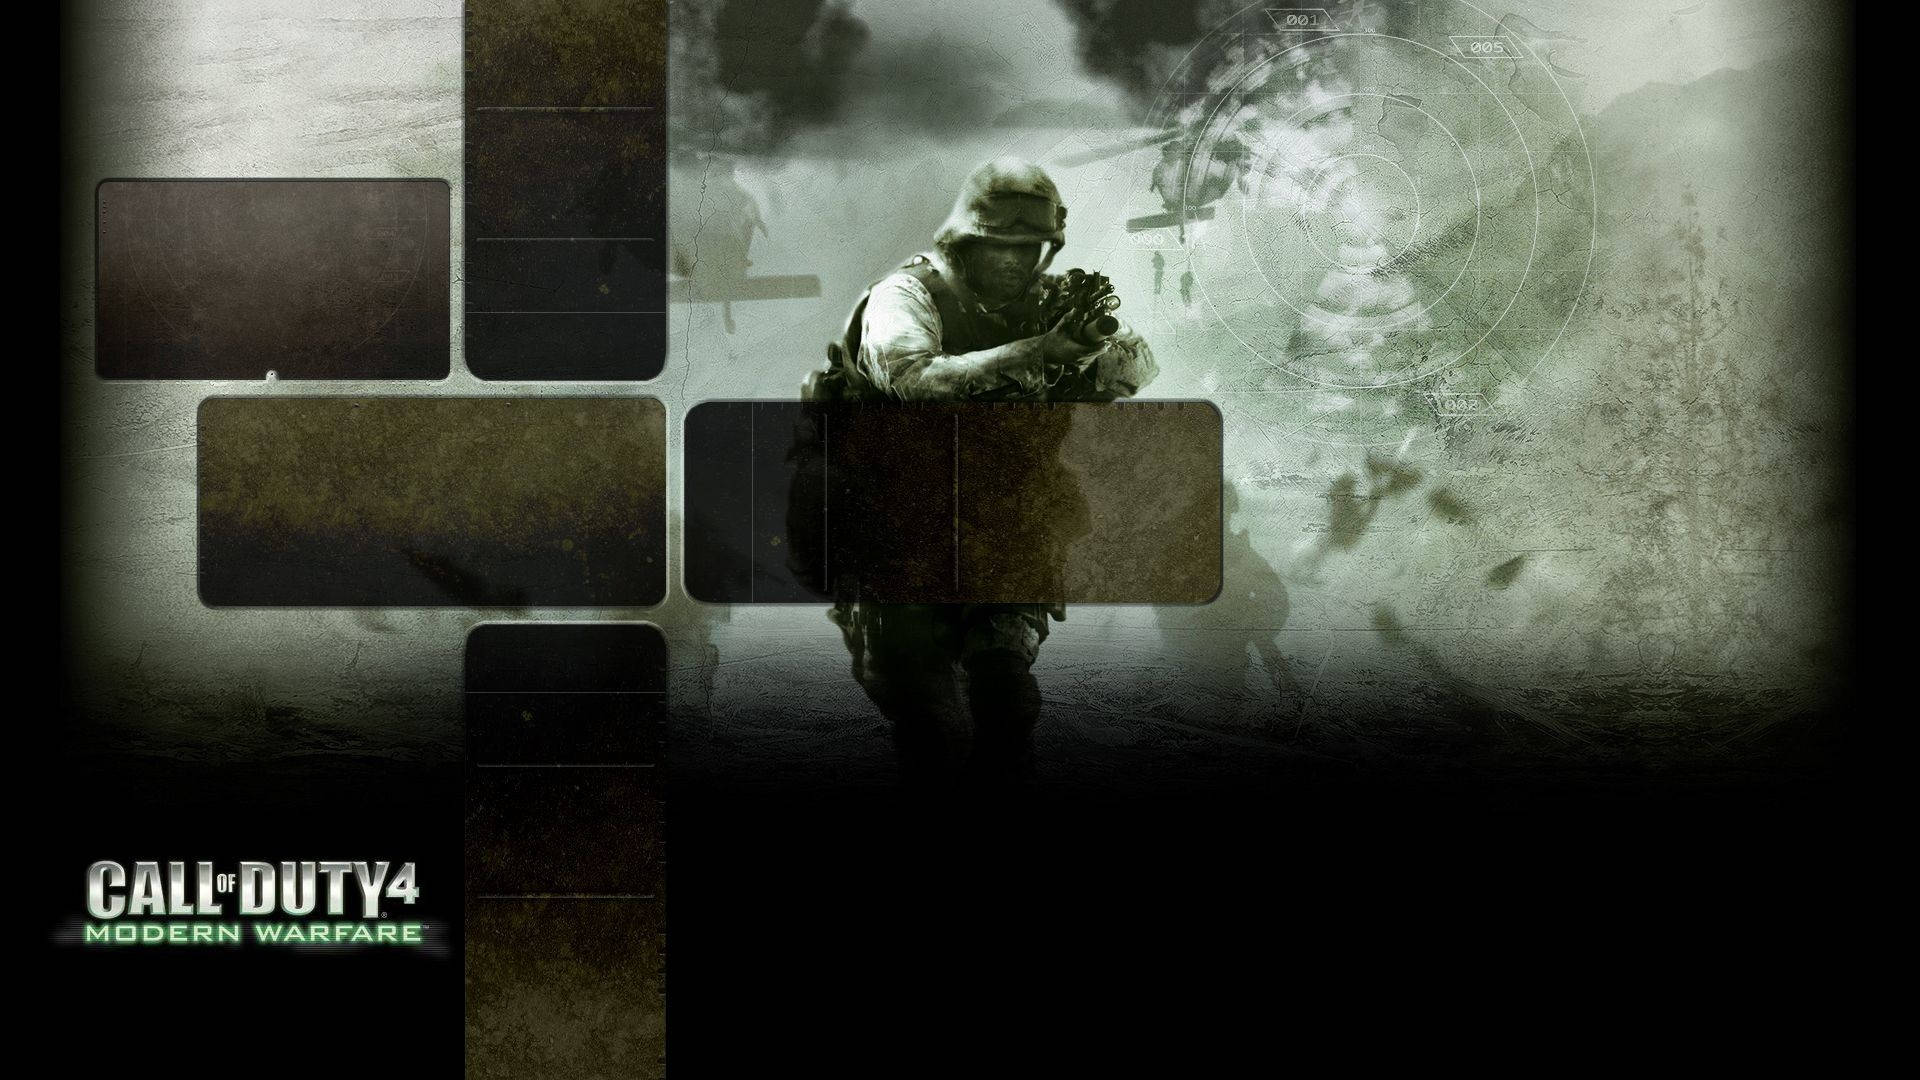 Ps3 Call Of Duty 4 Background